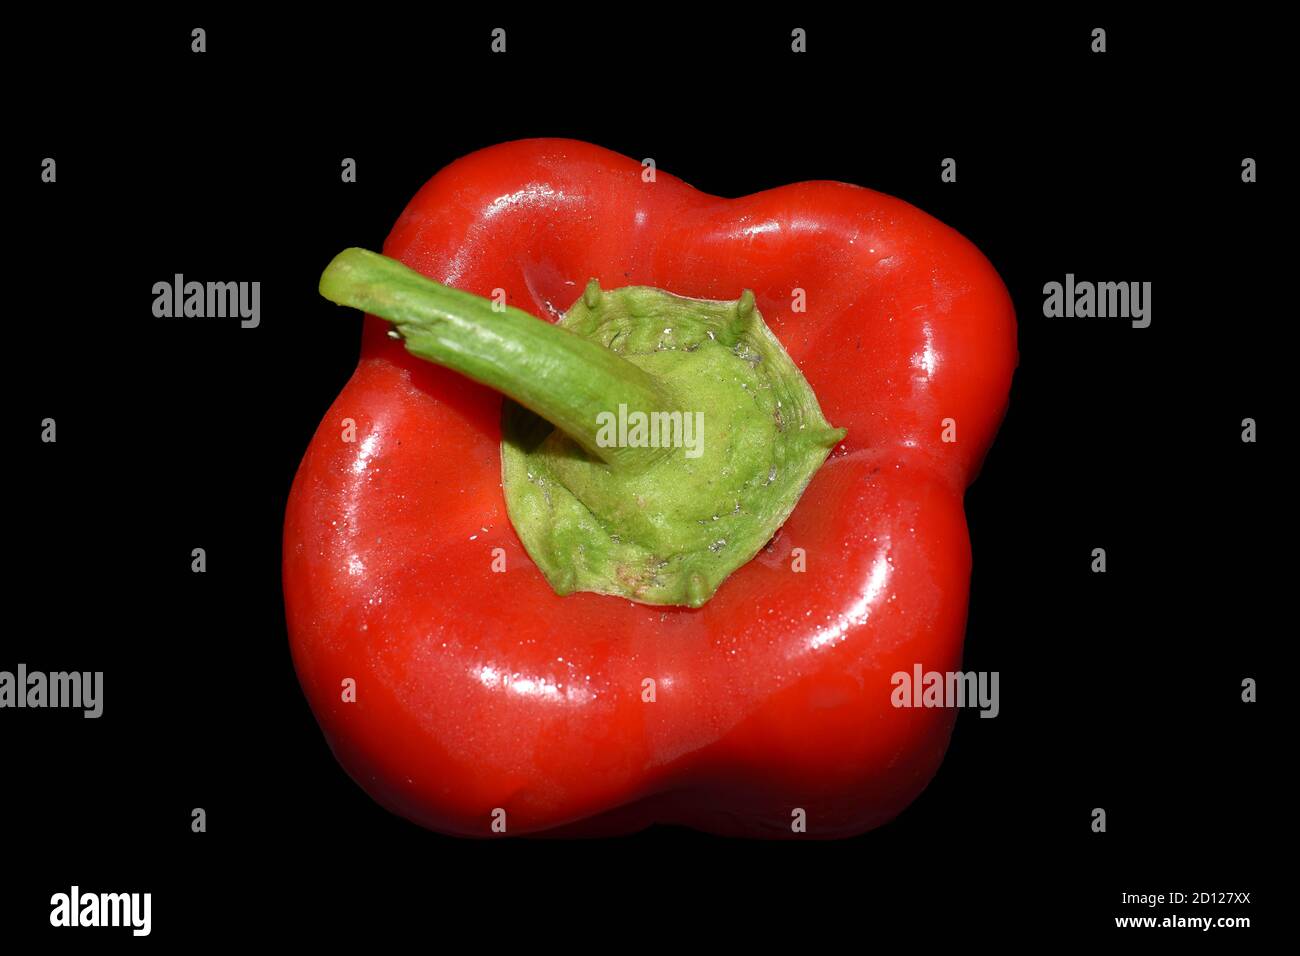 one red sweet bell pepper isolated close up on black background, produce, food photography Stock Photo